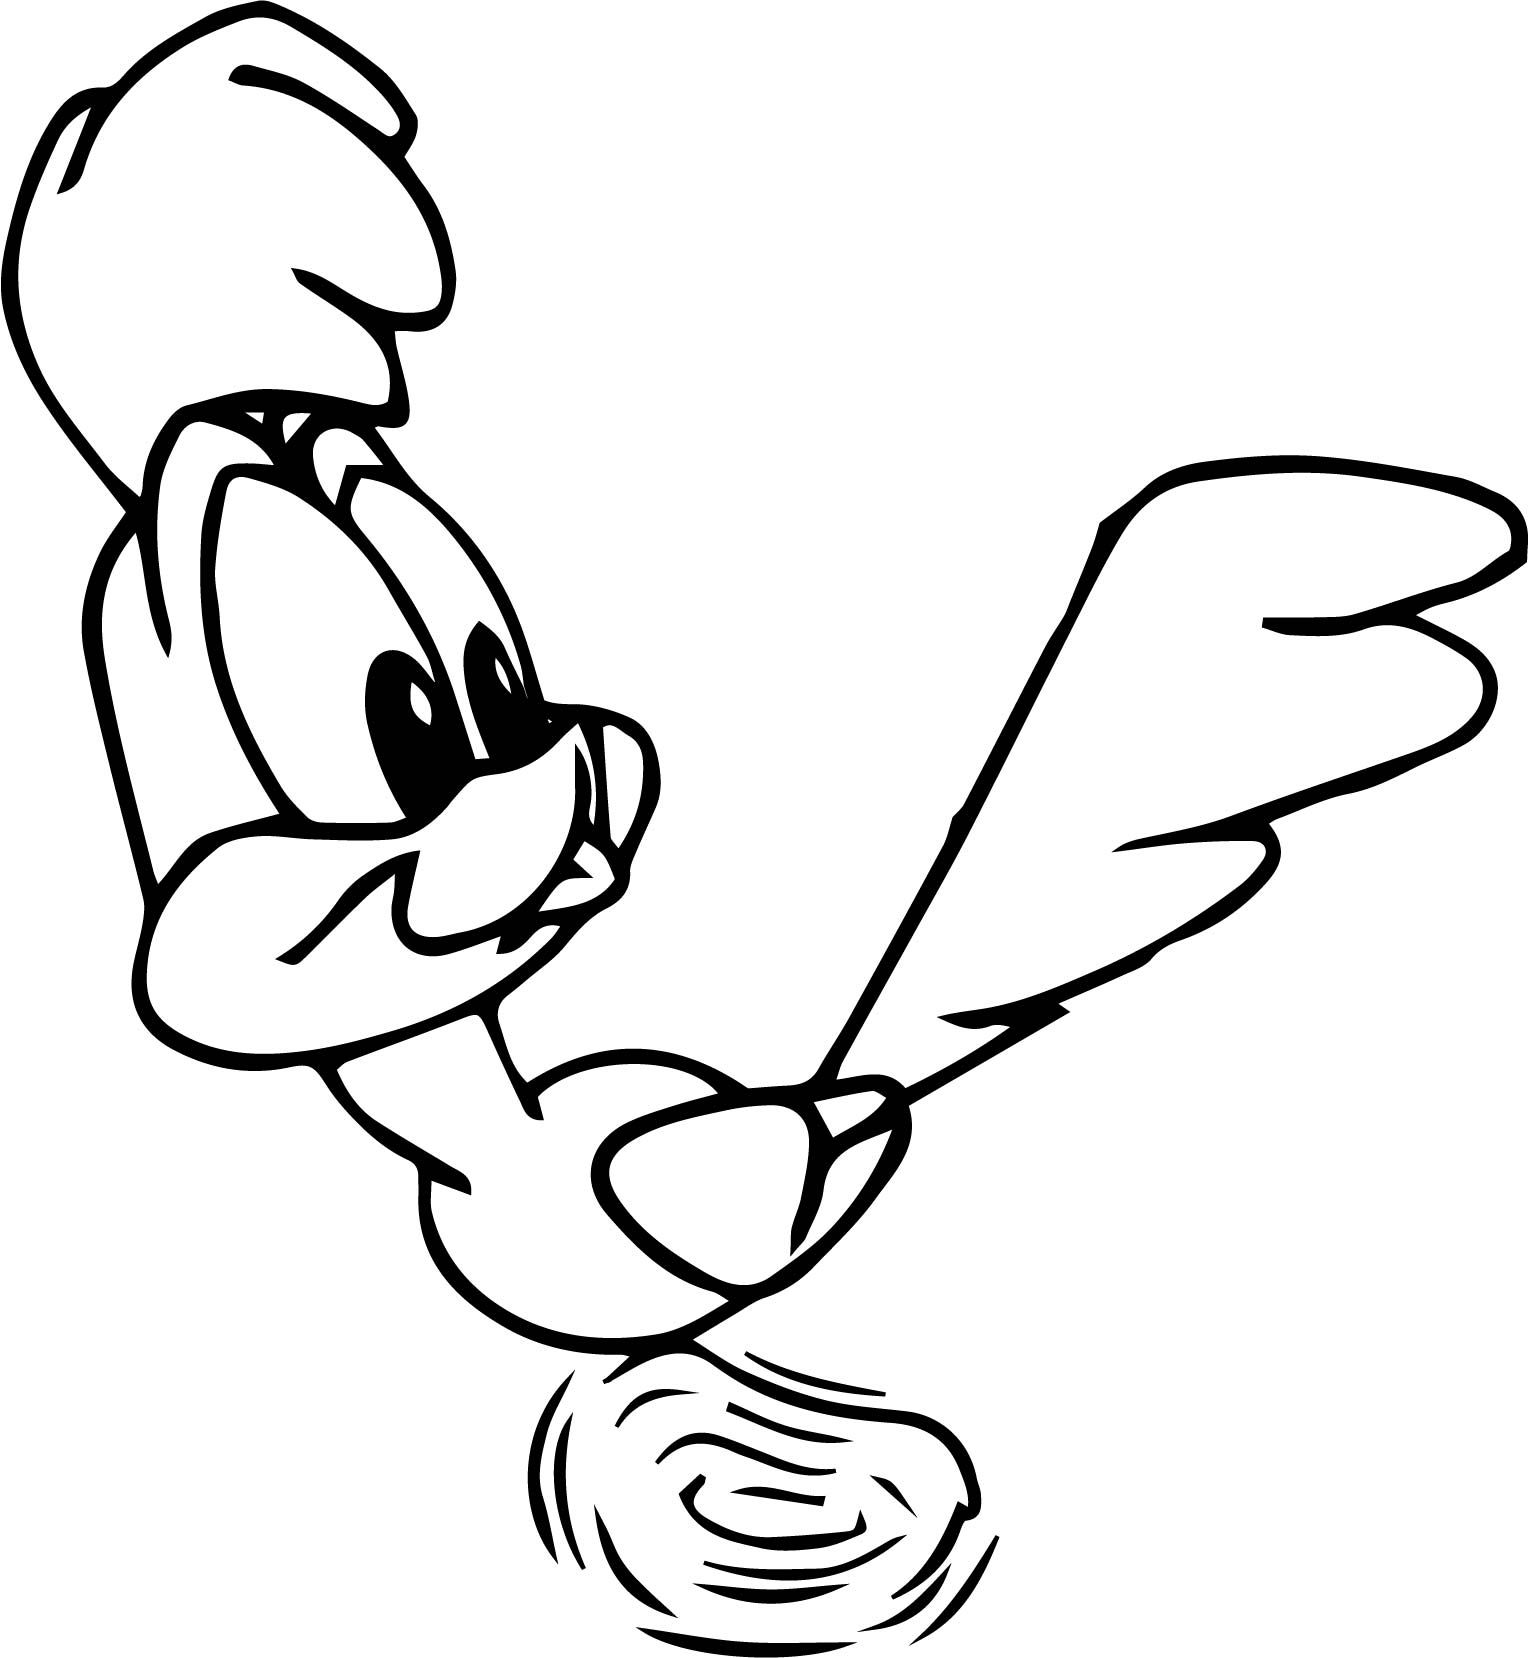 nice Fastest Baby Road Runner Coloring Page | Bird coloring ...